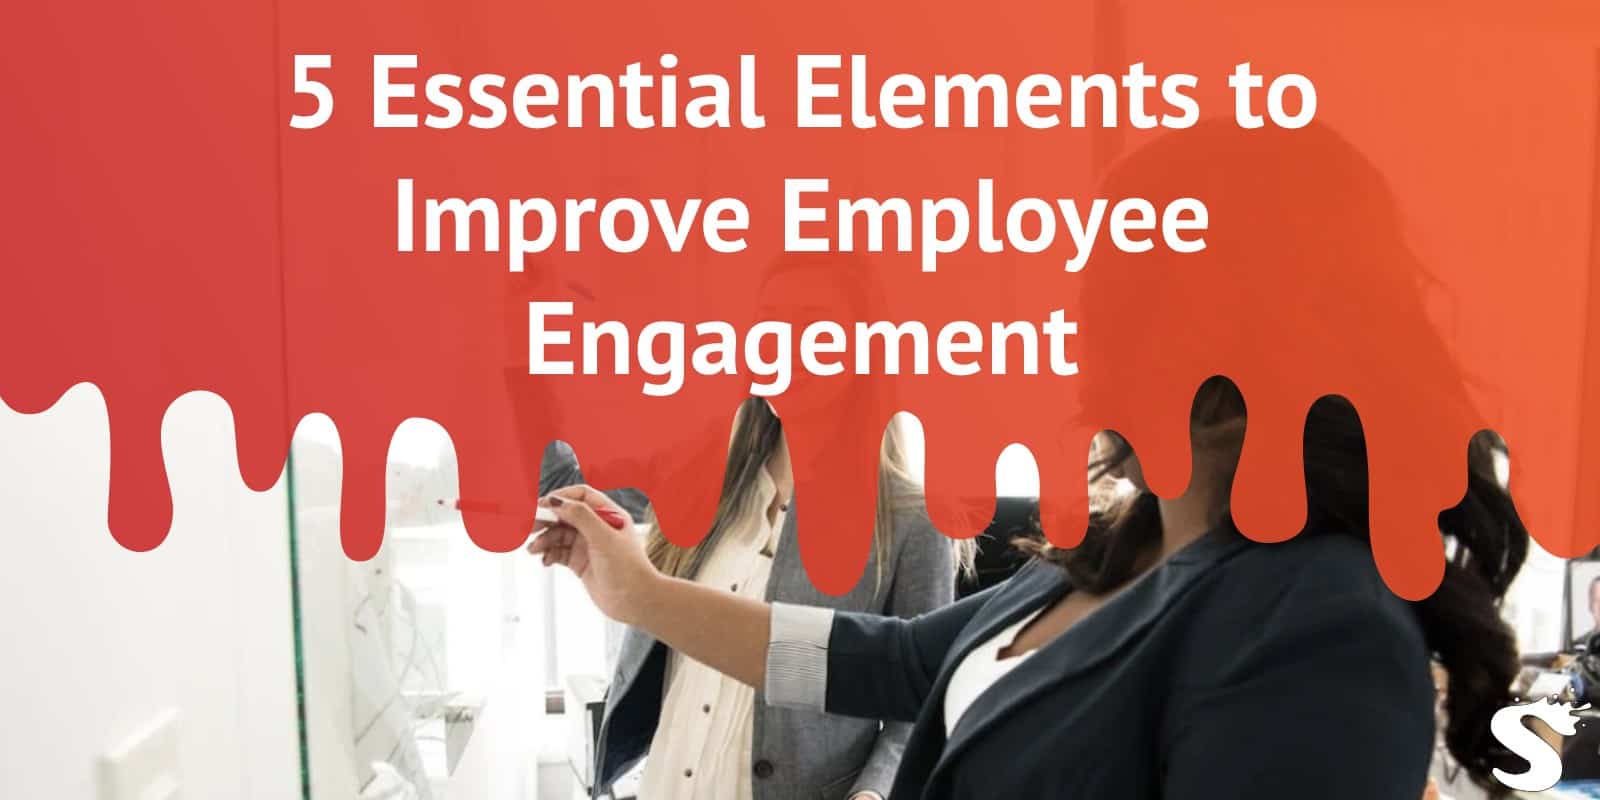 5 Essential Elements to Improve Employee Engagement